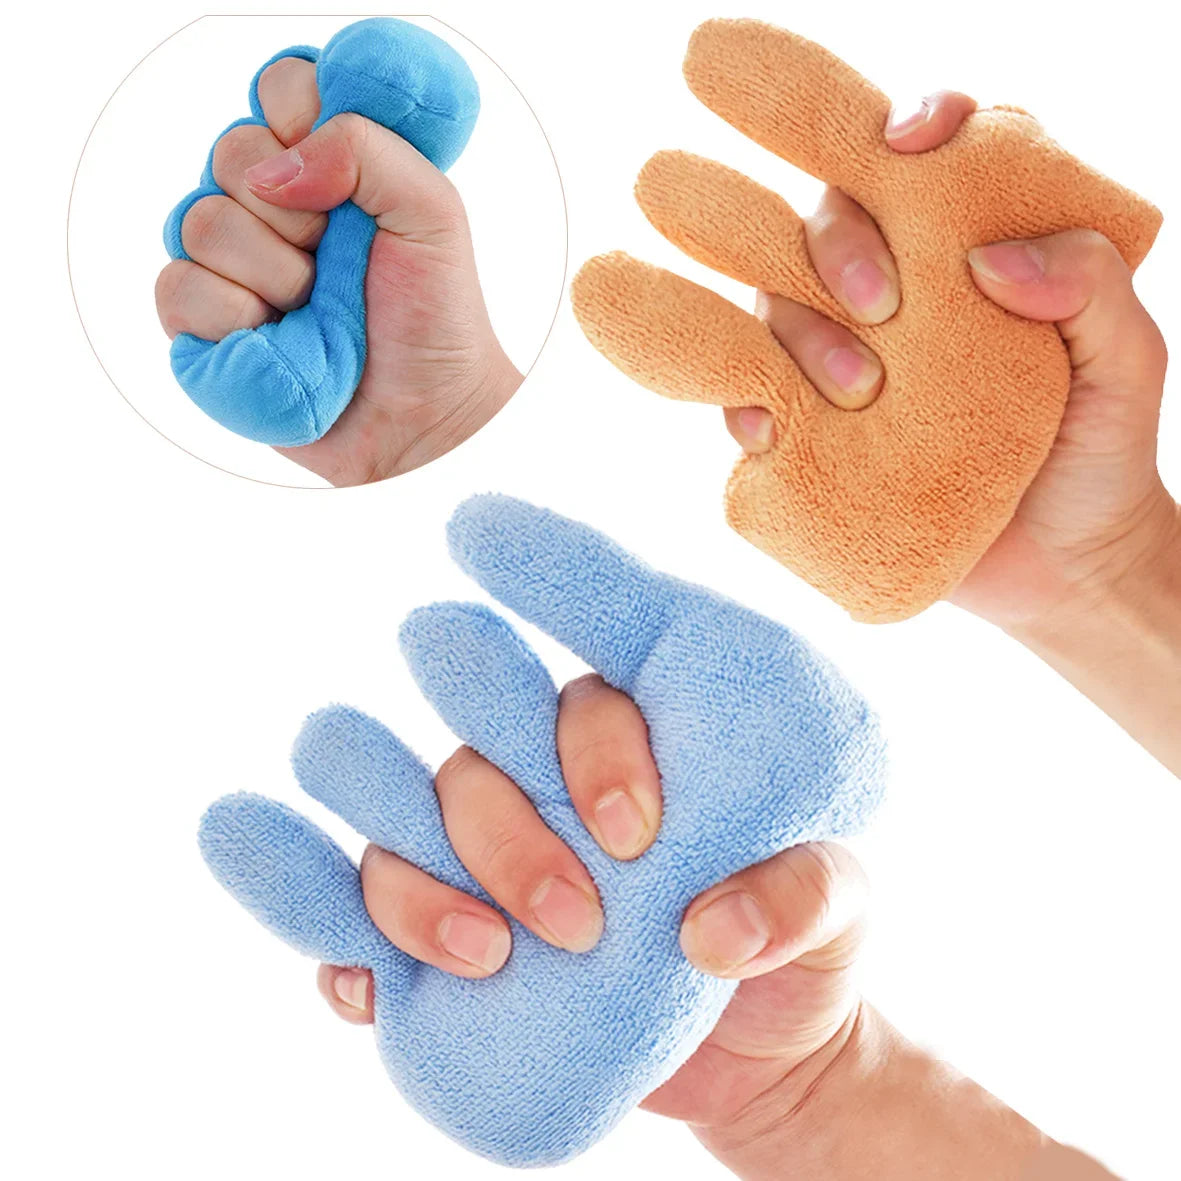 Hand Contracture Cushion for Finger Rehabilitation Training and Prevention